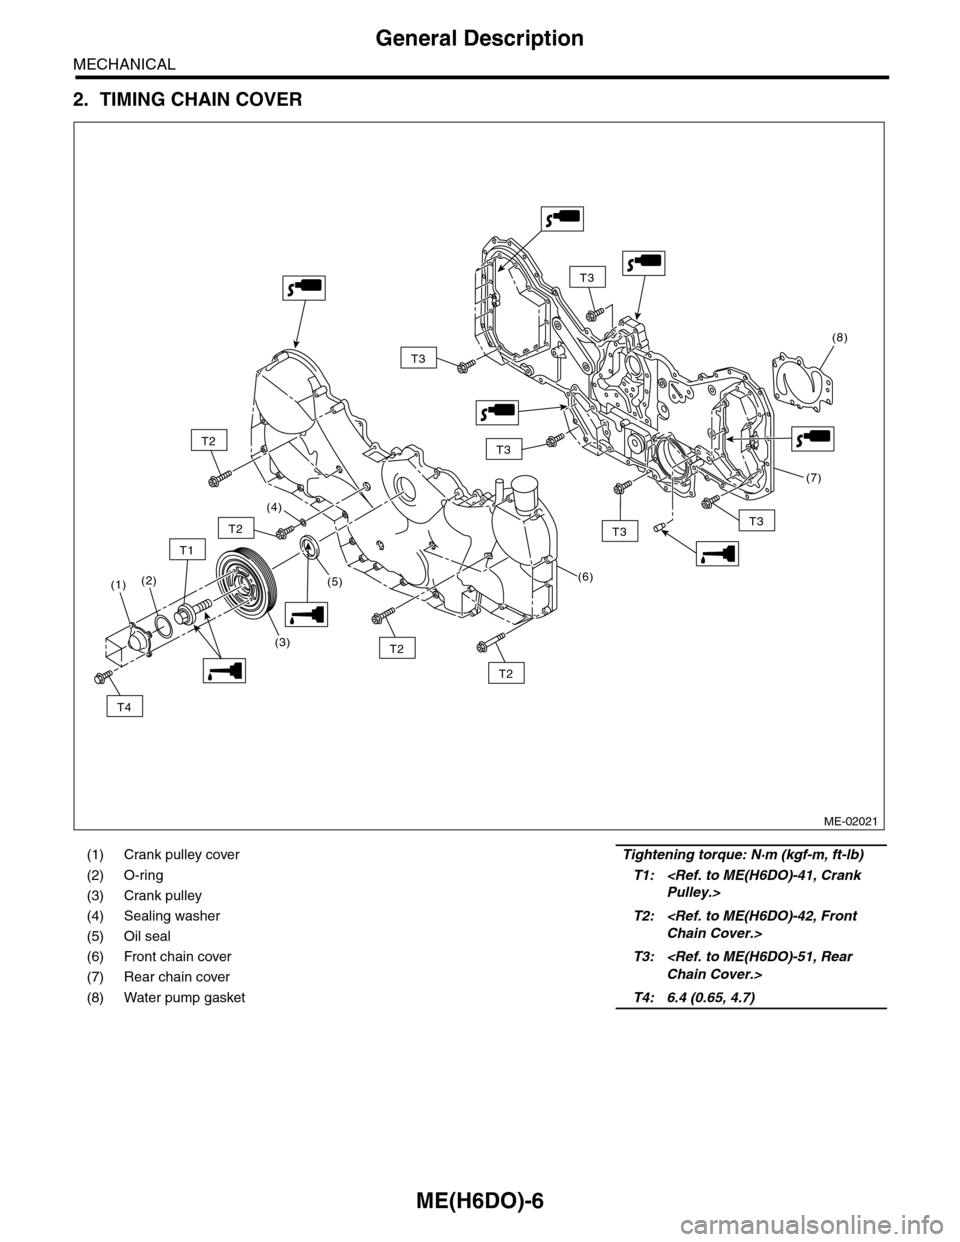 SUBARU TRIBECA 2009 1.G Service Workshop Manual ME(H6DO)-6
General Description
MECHANICAL
2. TIMING CHAIN COVER
(1) Crank pulley coverTightening torque: N·m (kgf-m, ft-lb)
(2) O-ringT1: <Ref. to ME(H6DO)-41, Crank 
Pulley.>(3) Crank pulley
(4) Sea